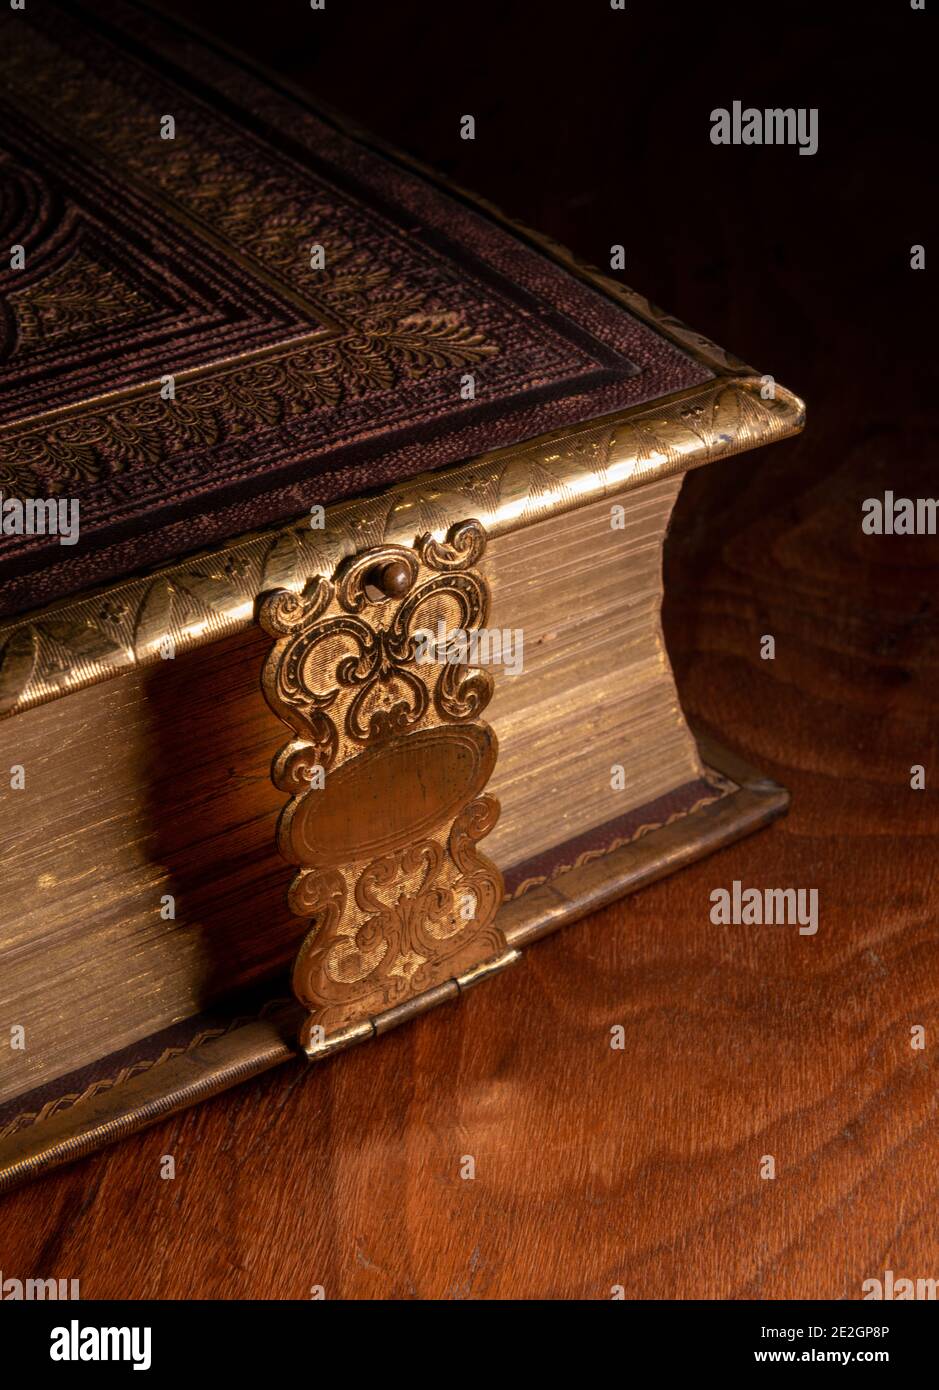 A leather bound antique book with a decorative metal clasp photographed on a glossy wooden surface Stock Photo